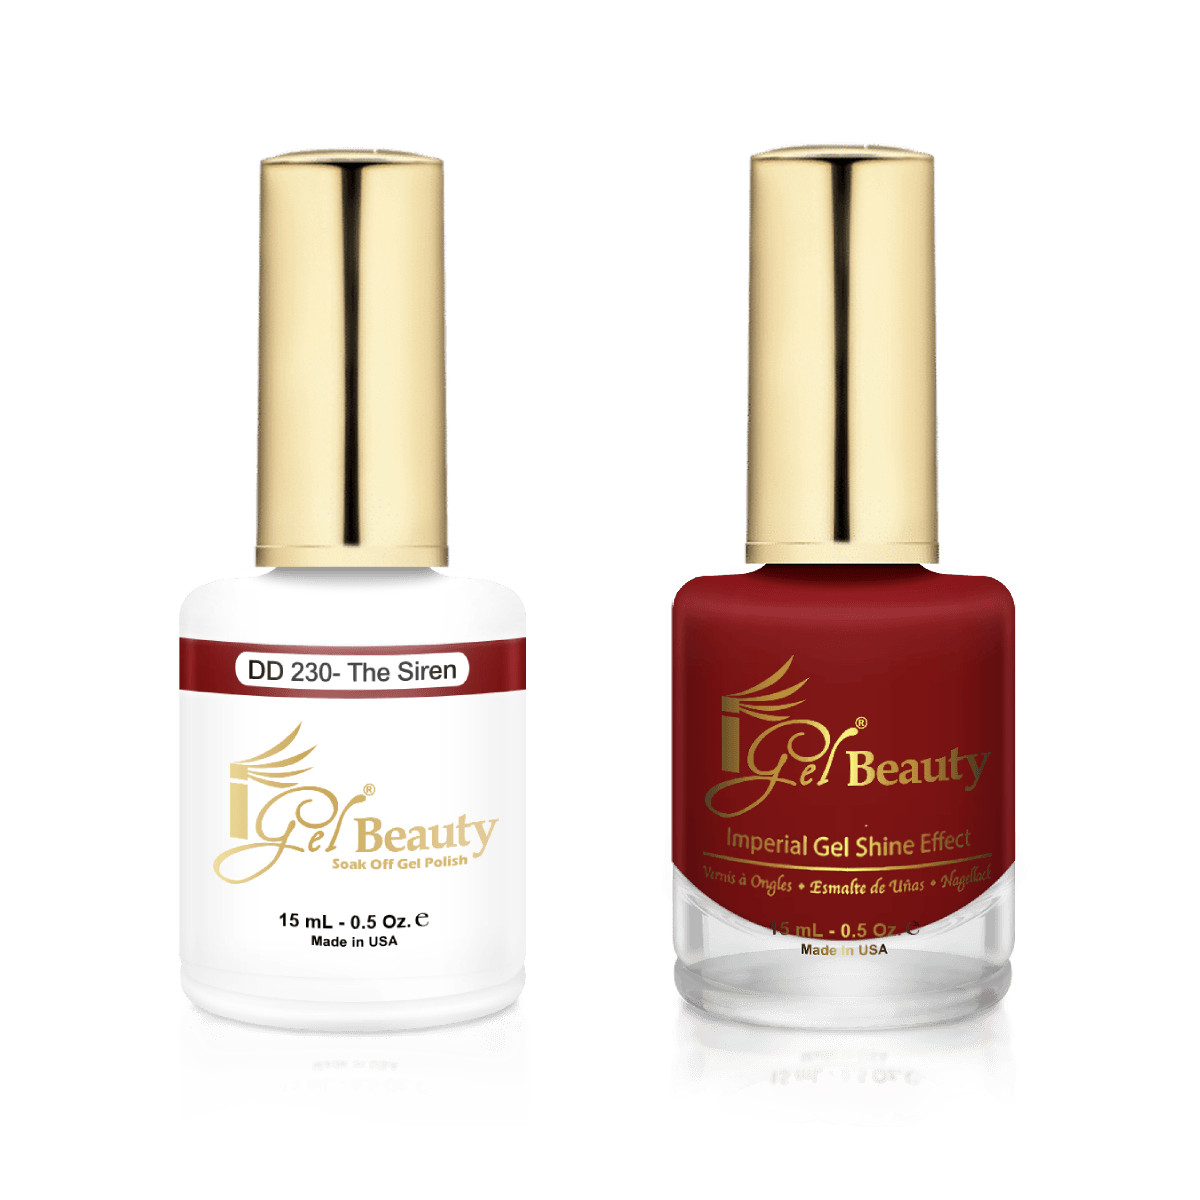 IGel Duo Gel Polish + Matching Nail Lacquer DD 230 THE SIREN